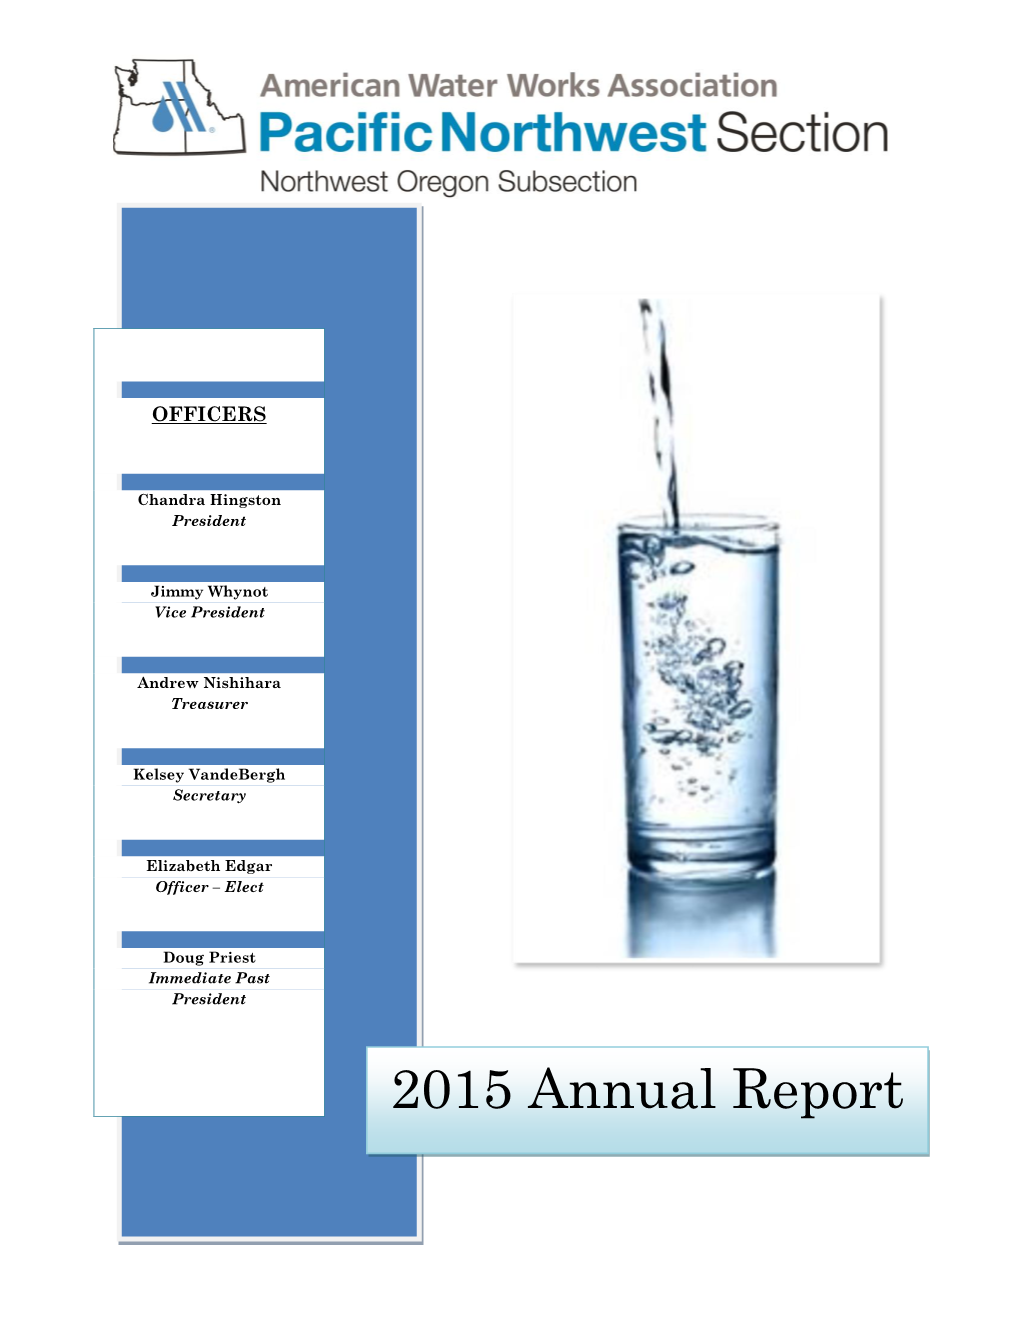 NW Oregon Subsection AWWA 2015 Annual Report